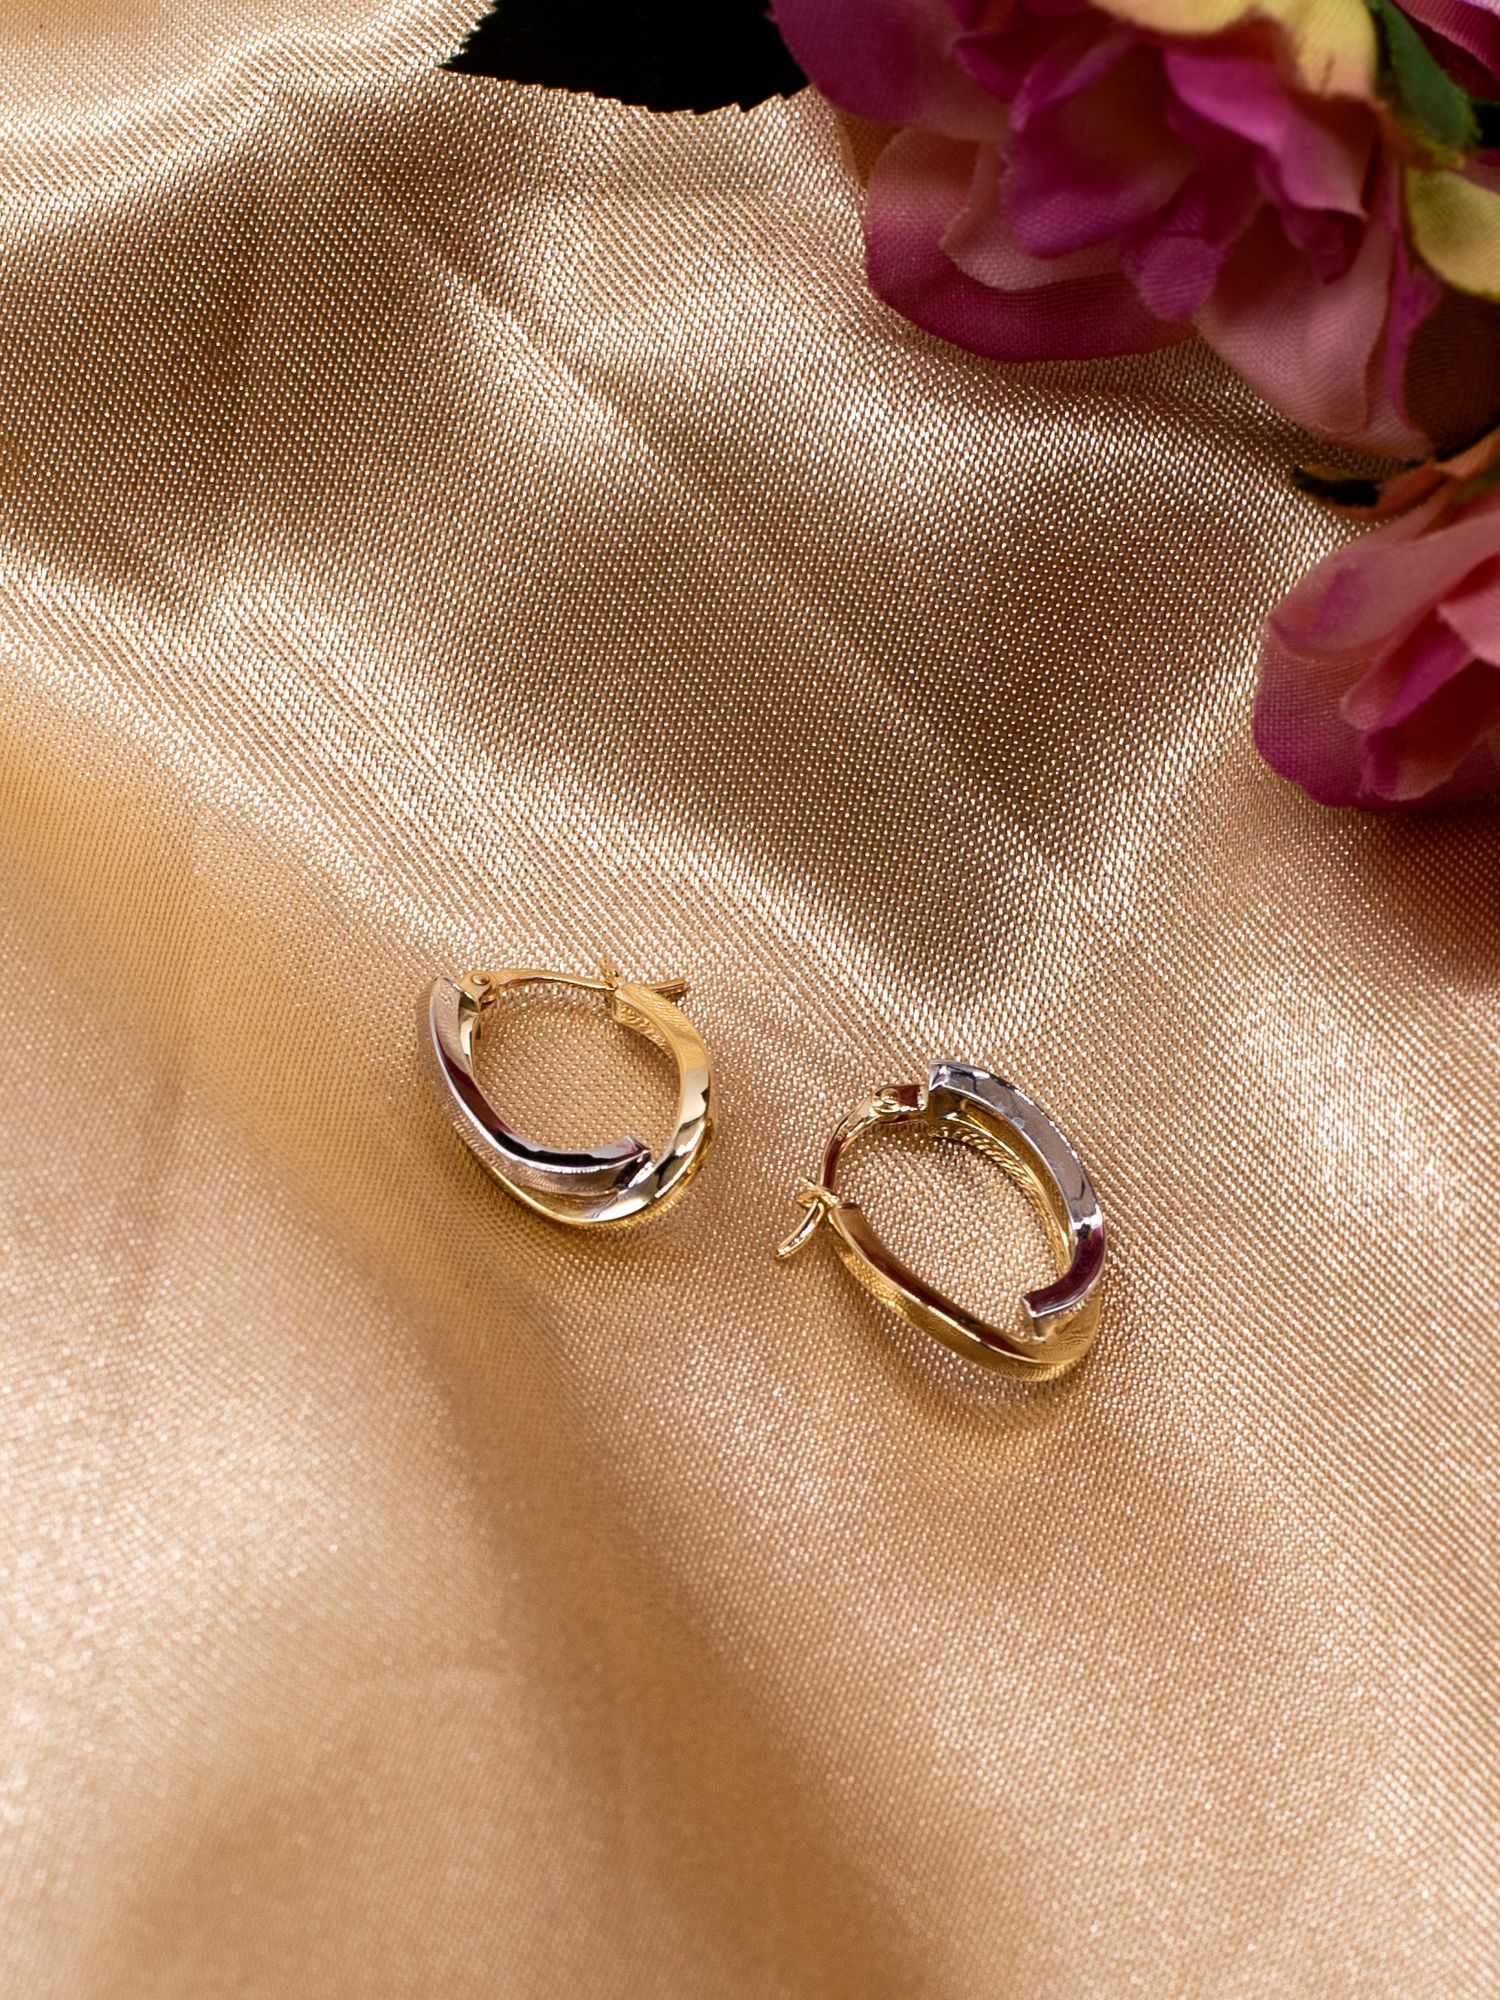 Buy IBB 9ct Yellow and White Gold Wave Hoop Earrings Online at johnlewis.com